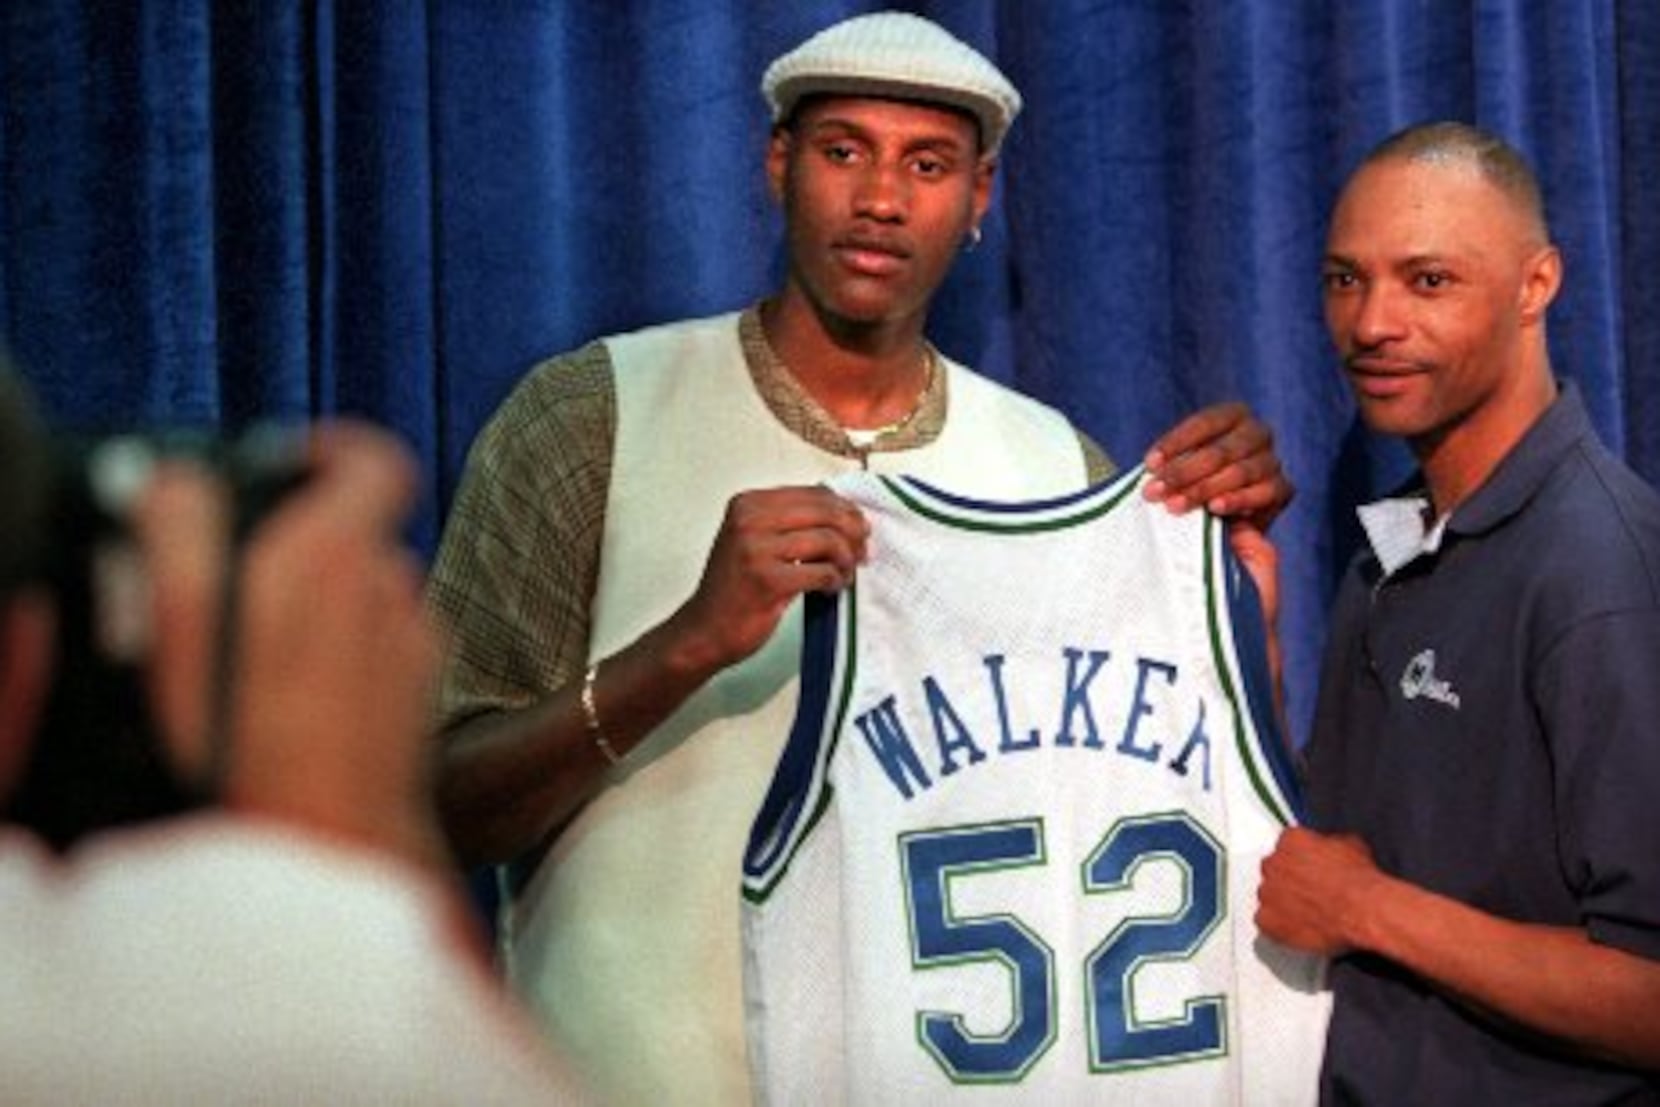 1996 NBA re-draft: The way it should have been